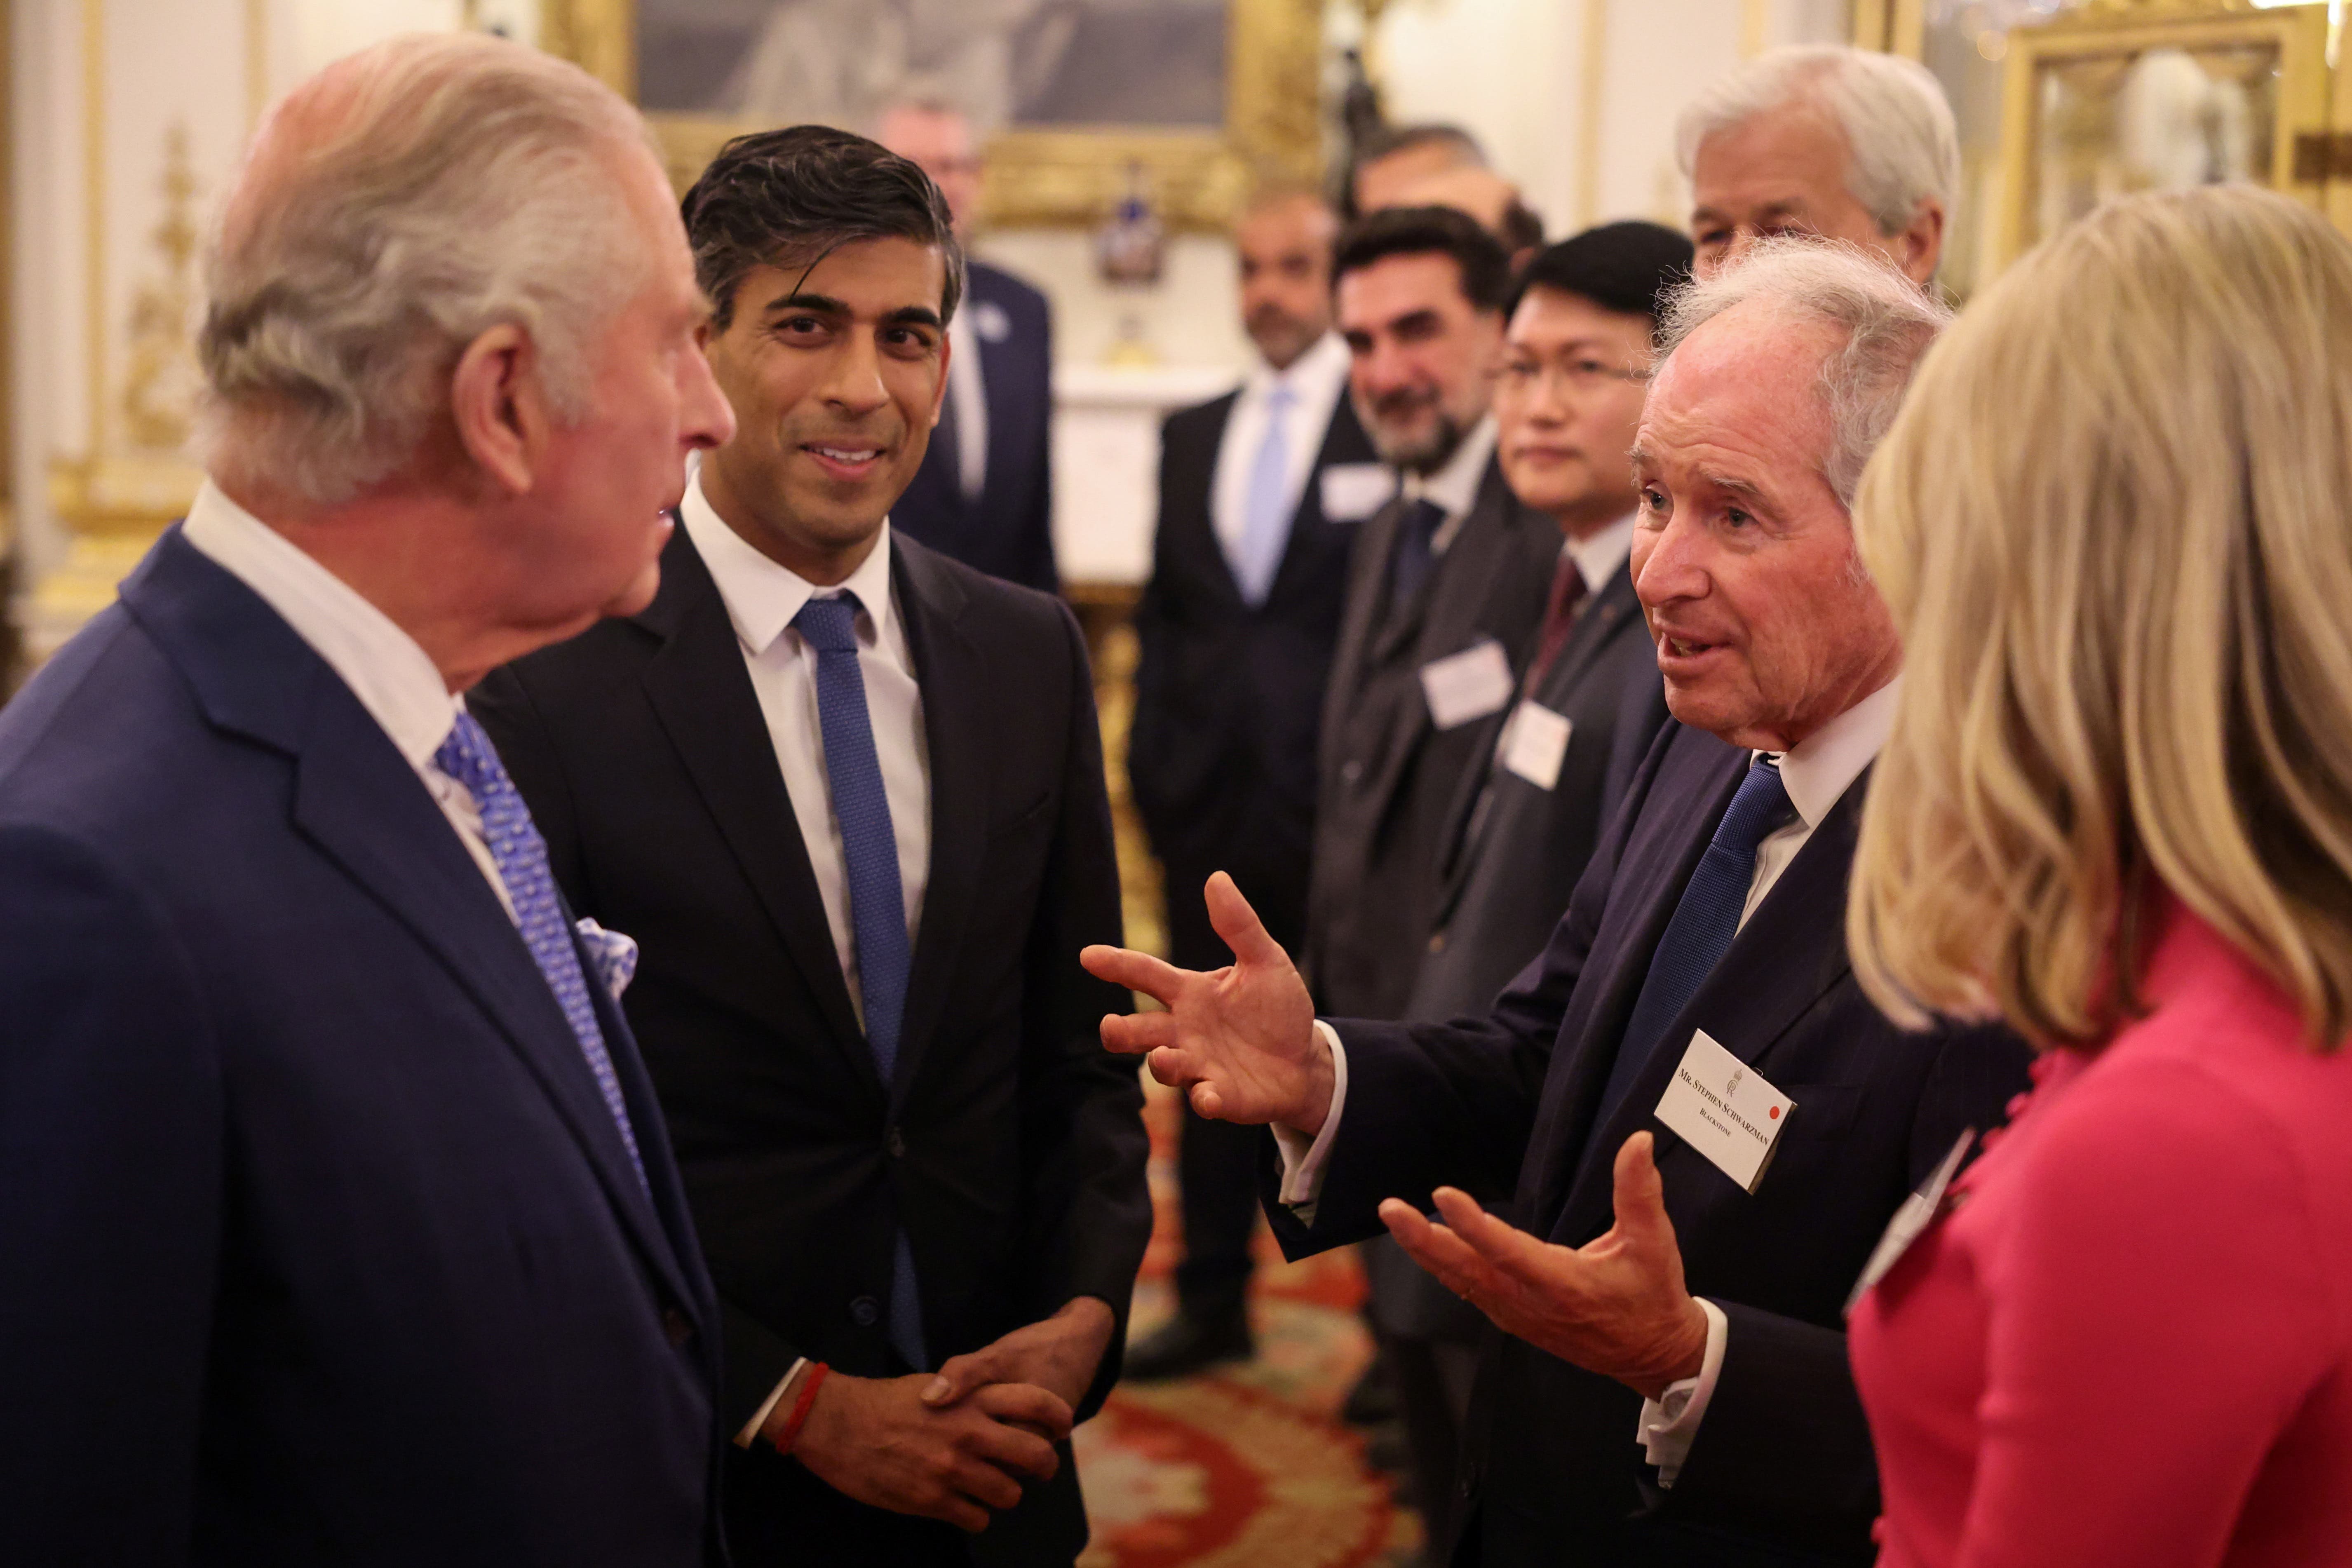 The King and Prime Minister Rishi Sunak meet guests during a reception at Buckingham Palace (Daniel Leal/PA)